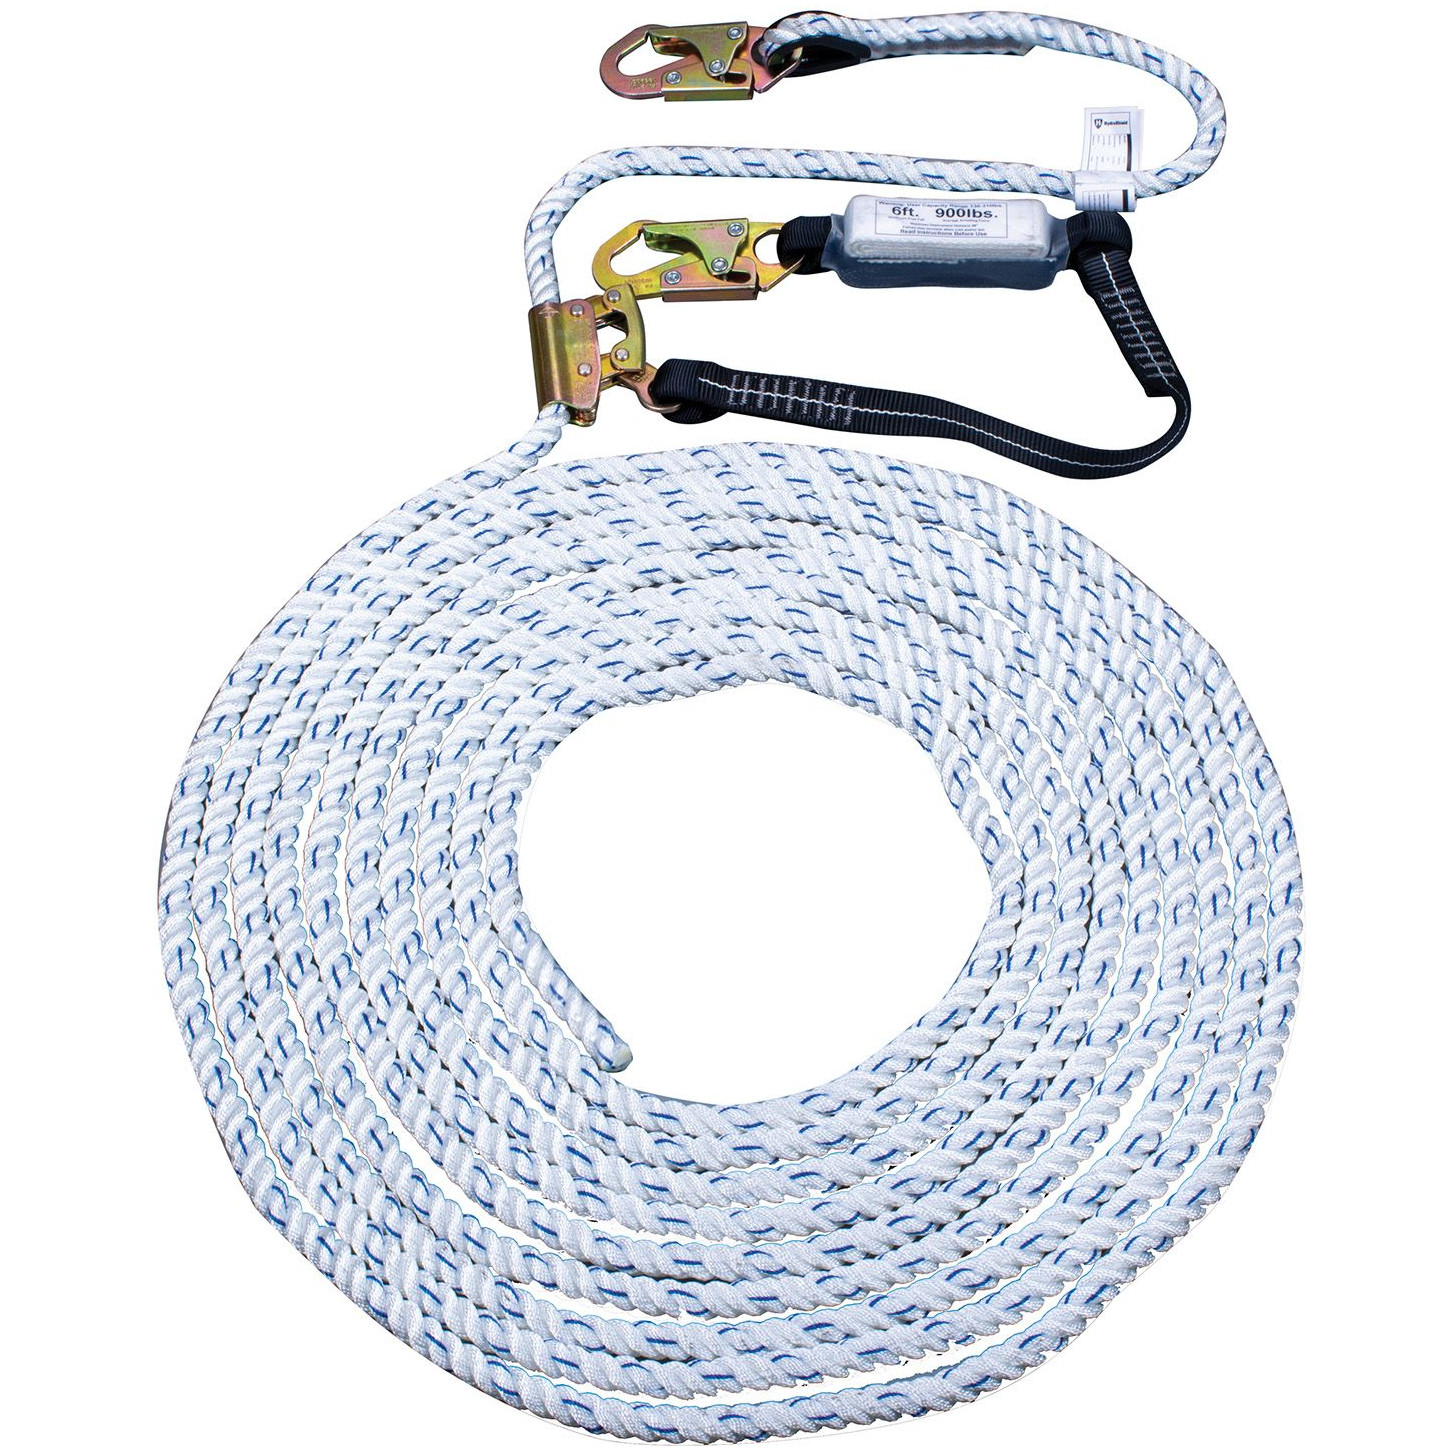 Product HydroShield Premium Fall Protection Lifeline Product